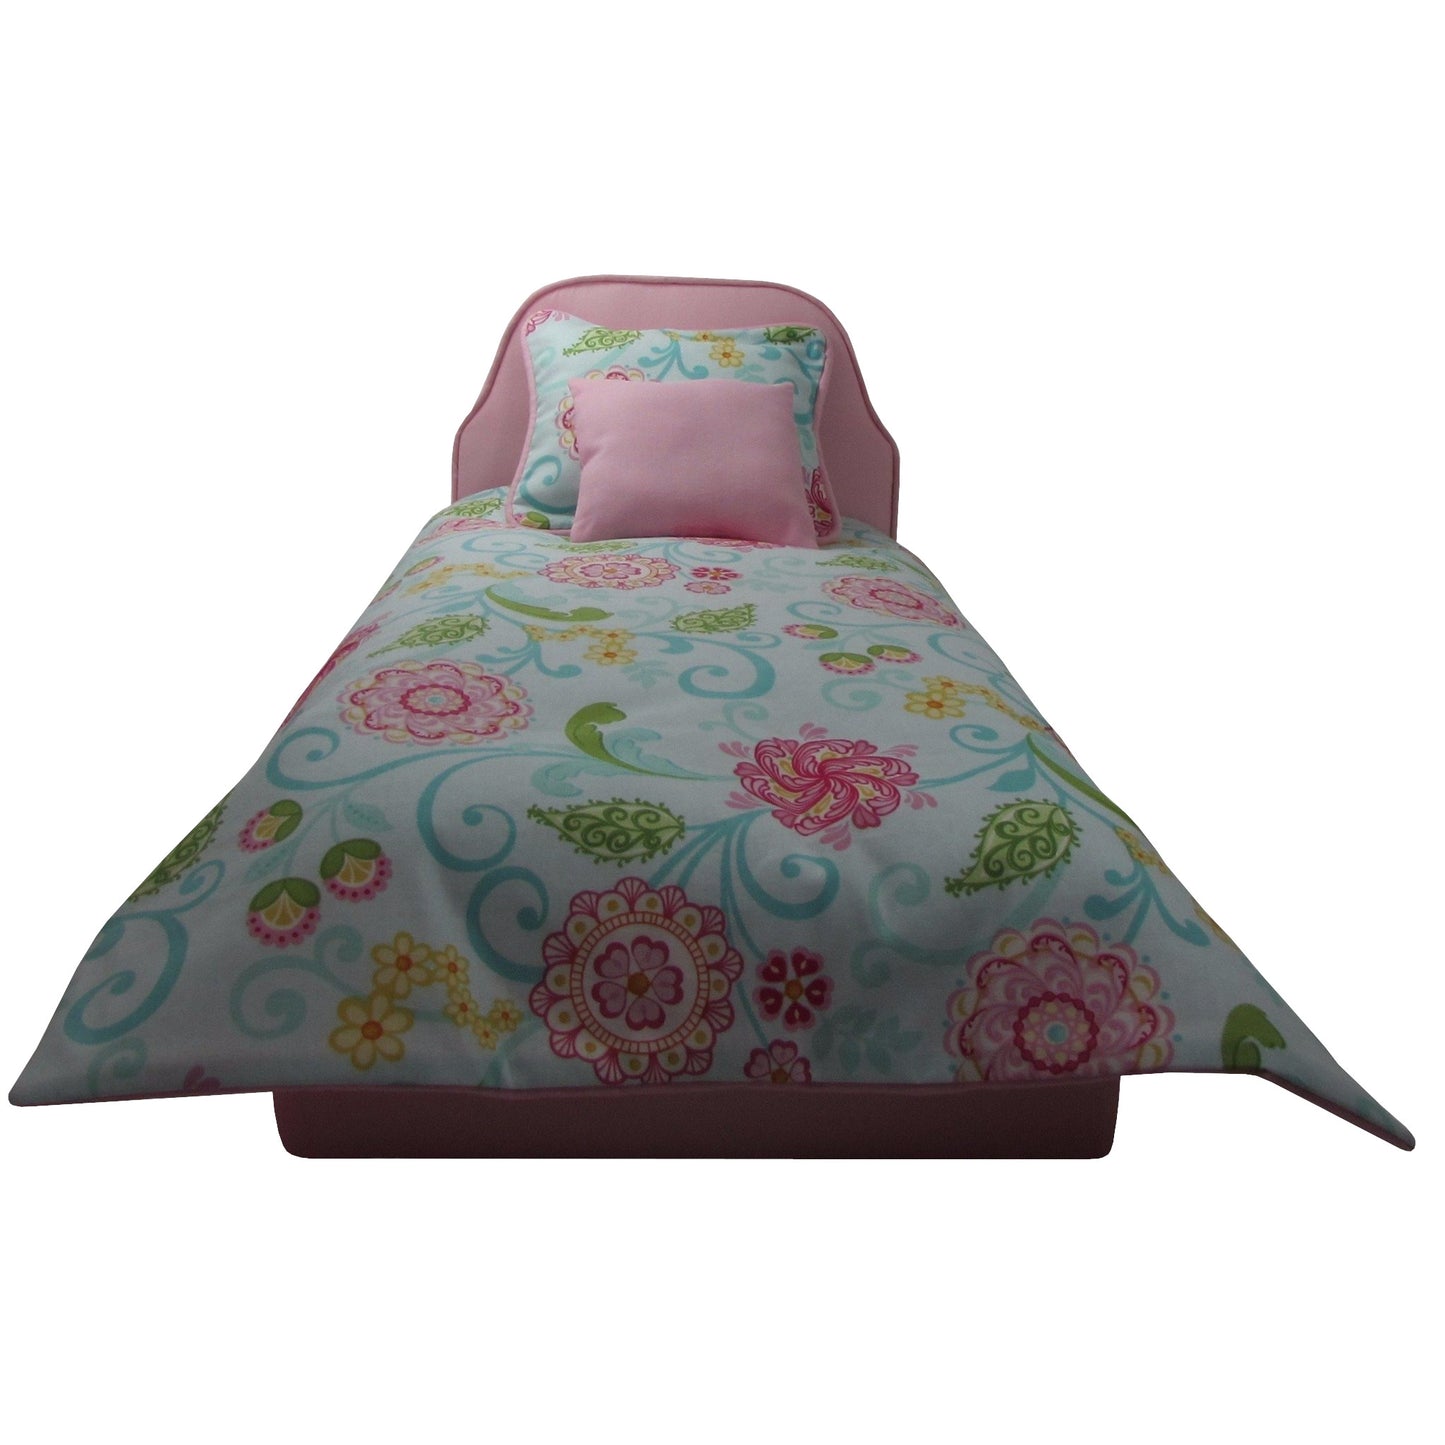 Pink Floral Doll Bedding for 18-inch dolls Second view